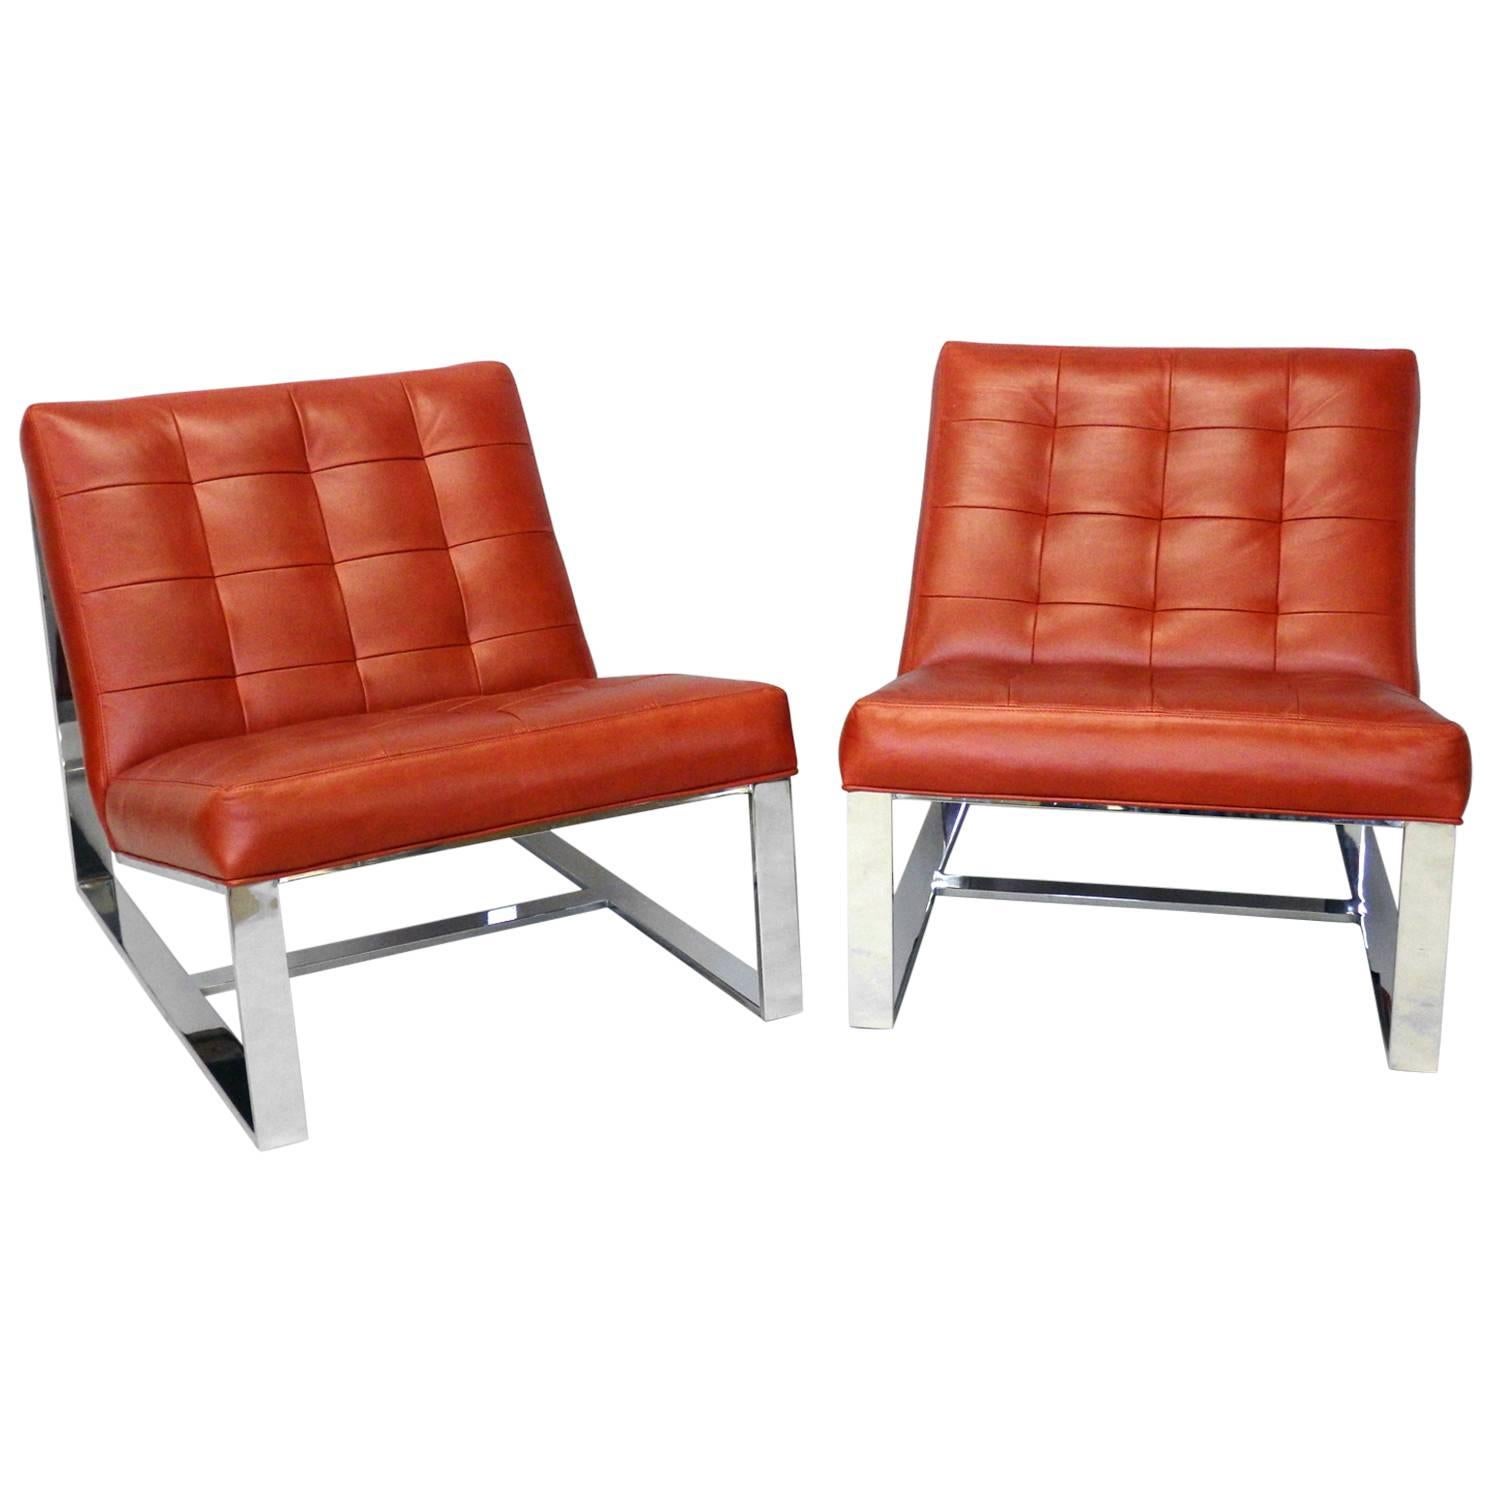 Pair of Milo Baughman Red Leather on Chrome Open Arm  Lounge Chairs For Sale